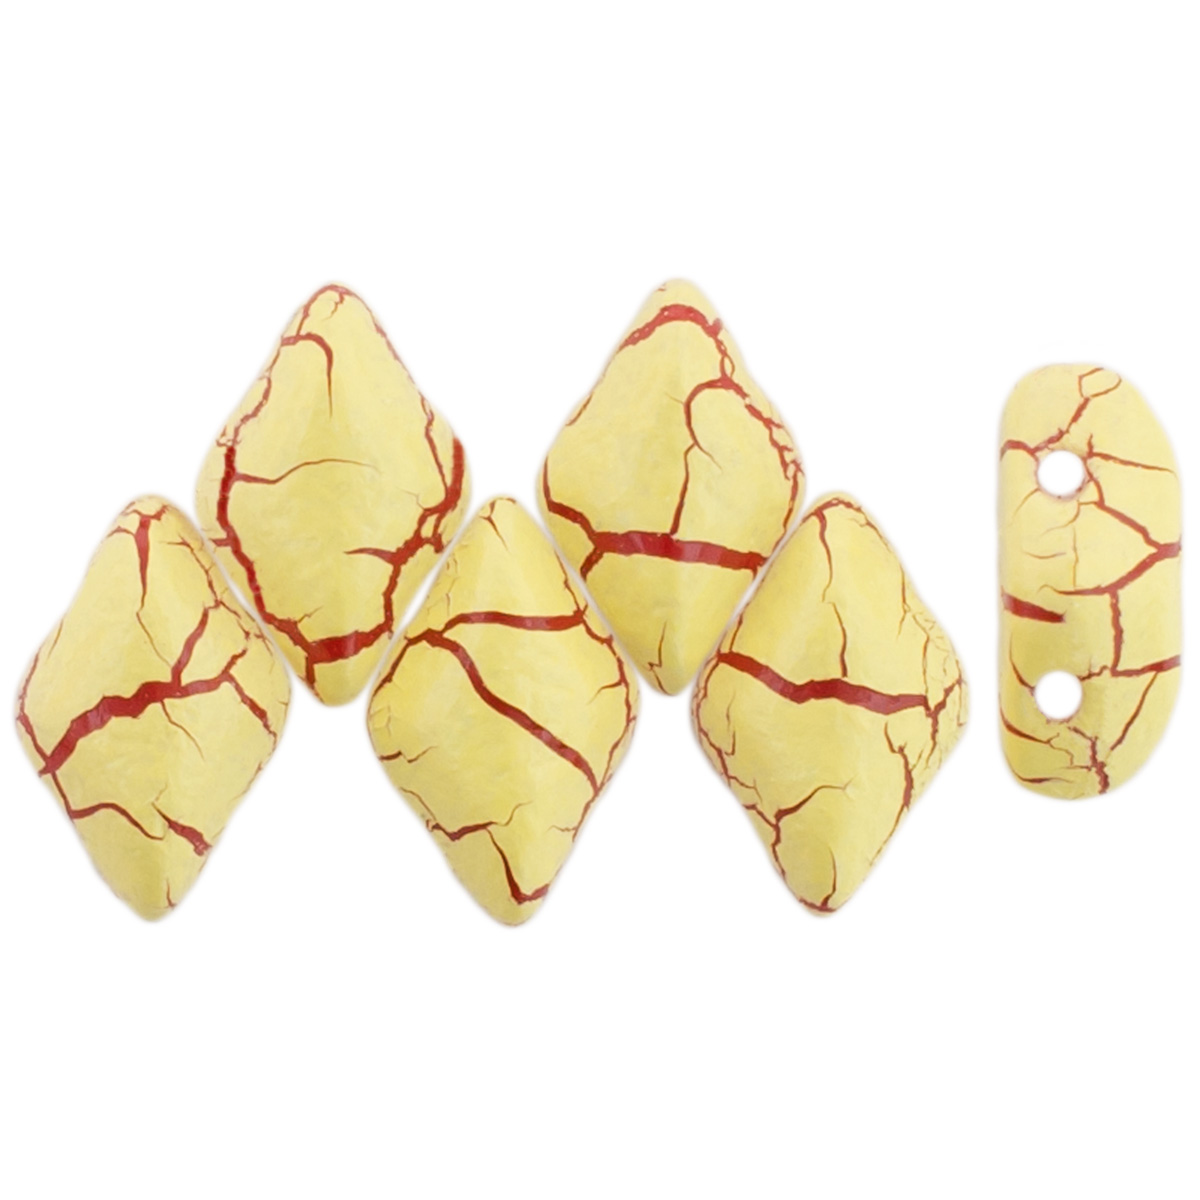 GEMDUO 8 x 5mm (loose) : Colortrends: Ionic Light Yellow/Dark Red